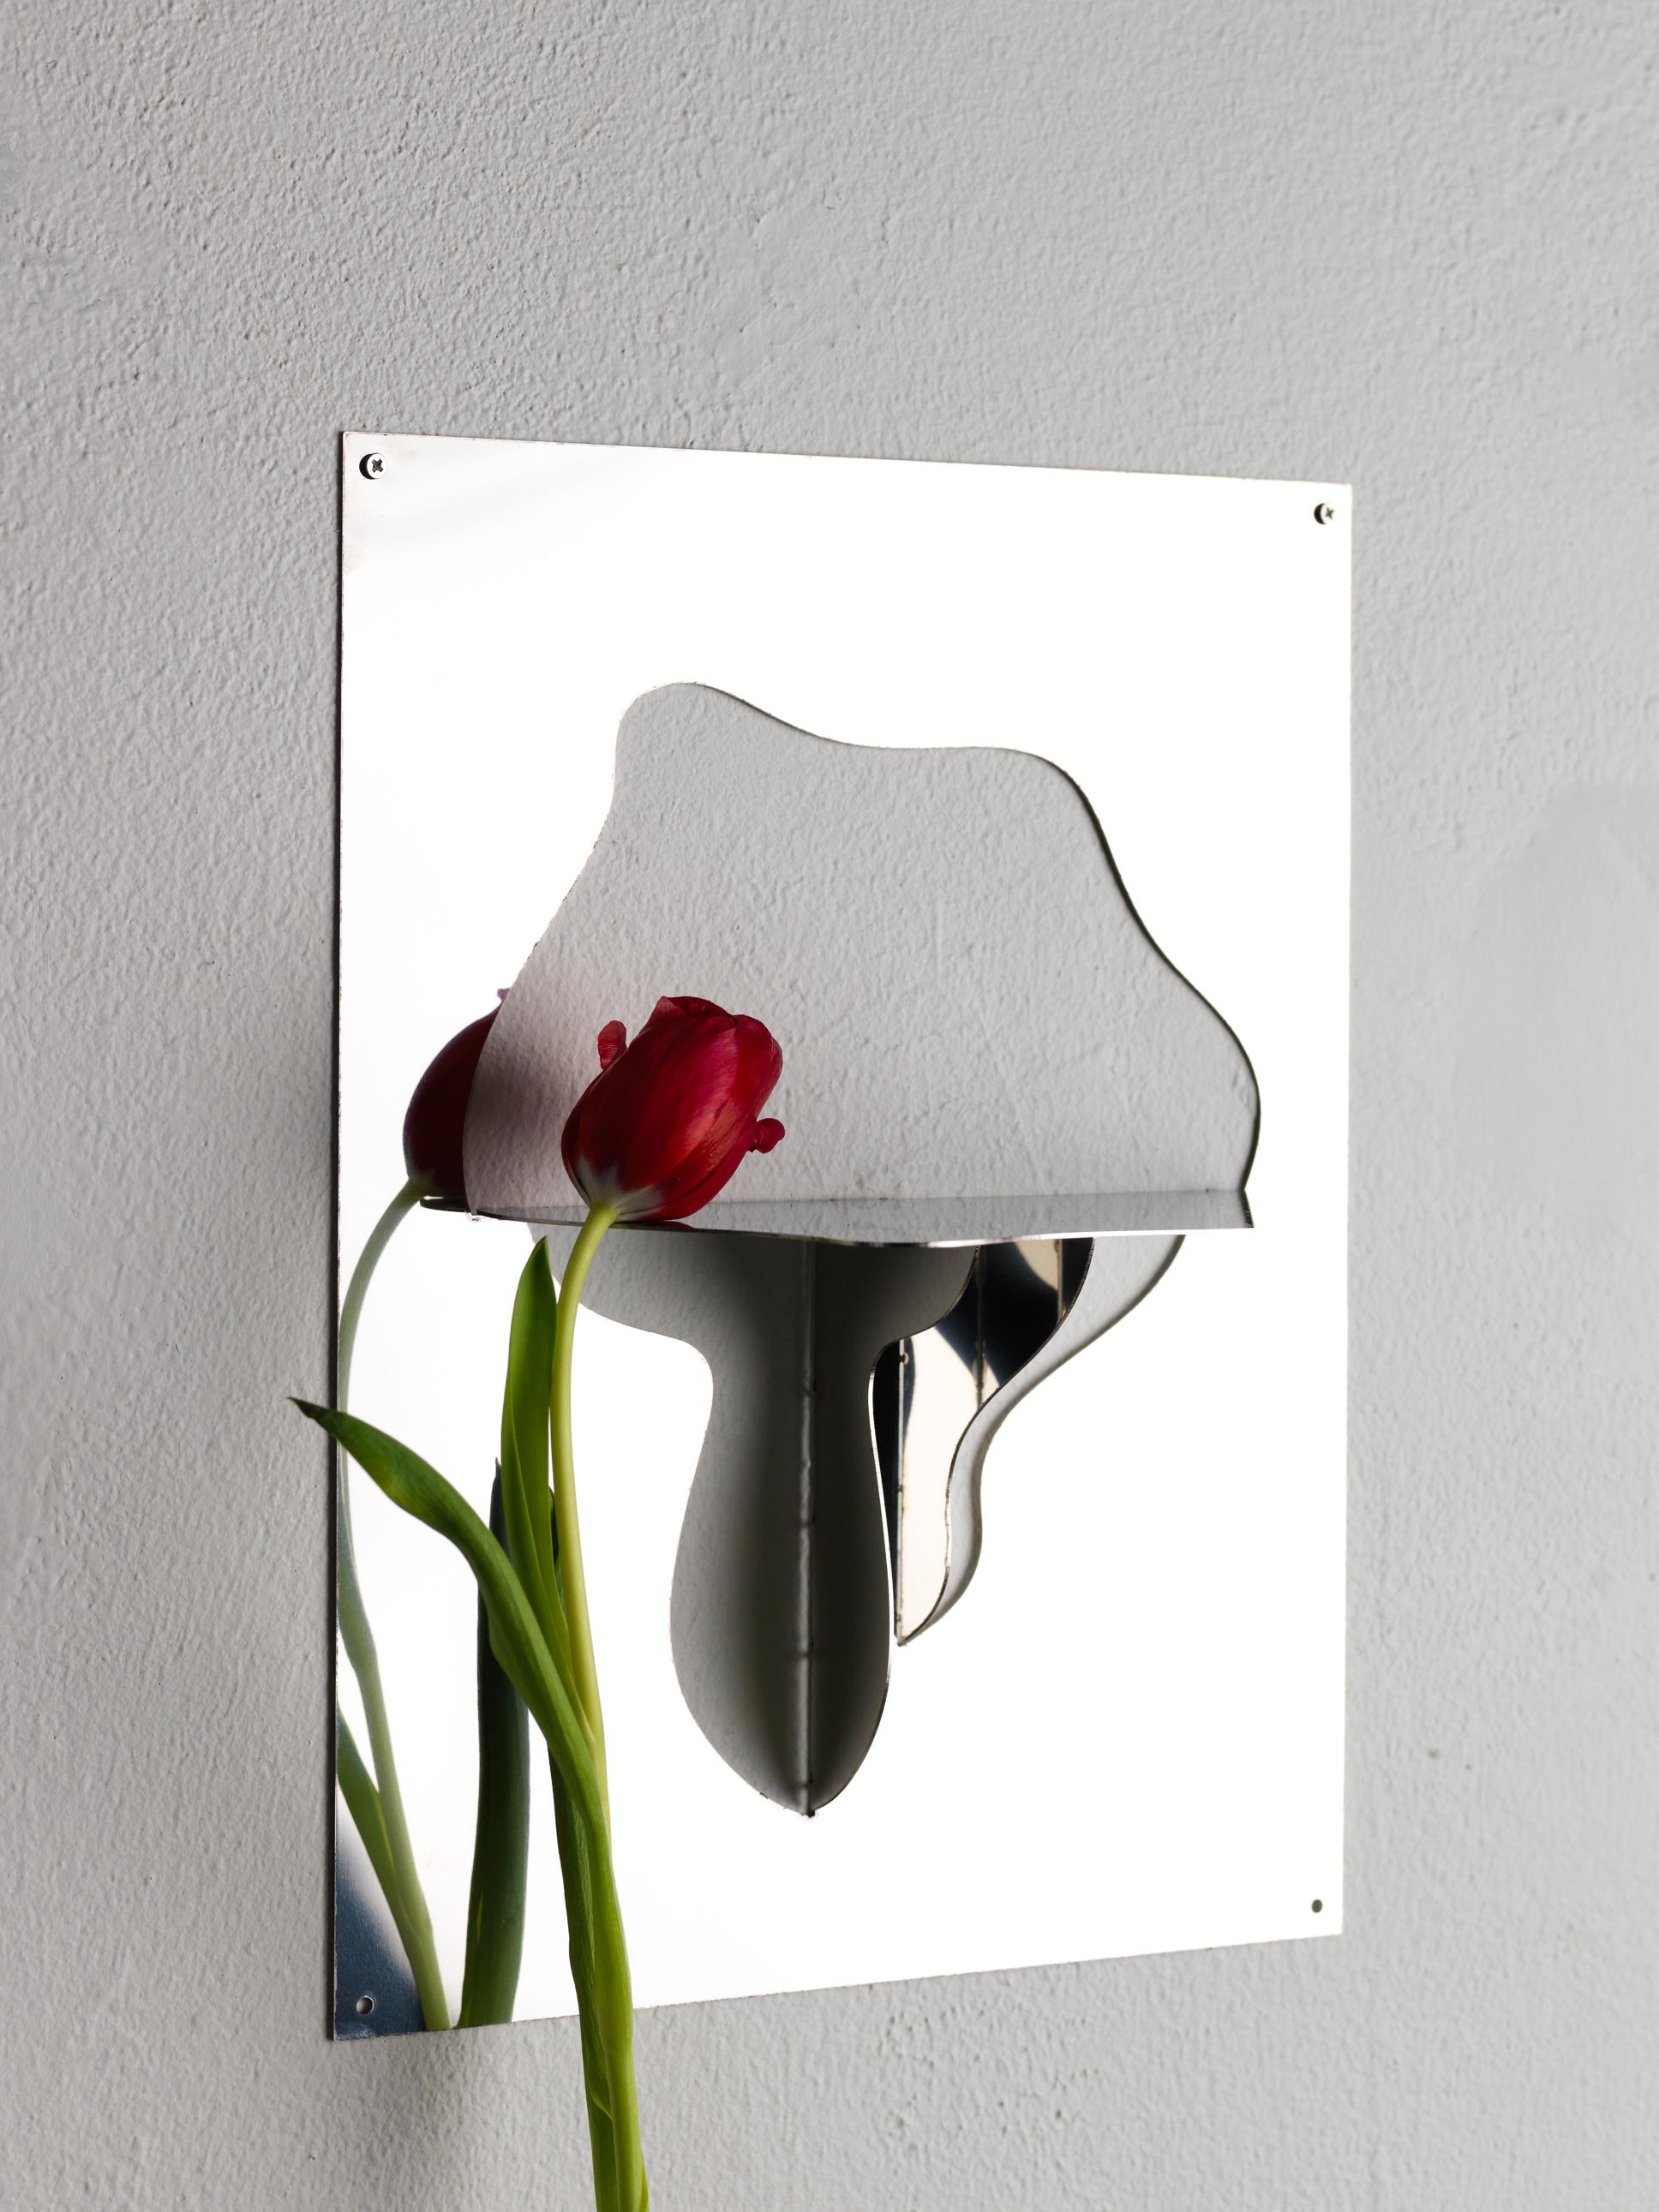 Made locally in Scania, south of Sweden. It is an item made in mirrored steel. It can easily get scratches and needs to be treated with care. The designer bends the mirrored shelf by hand in her studio from Malmö and it is signed with number. These